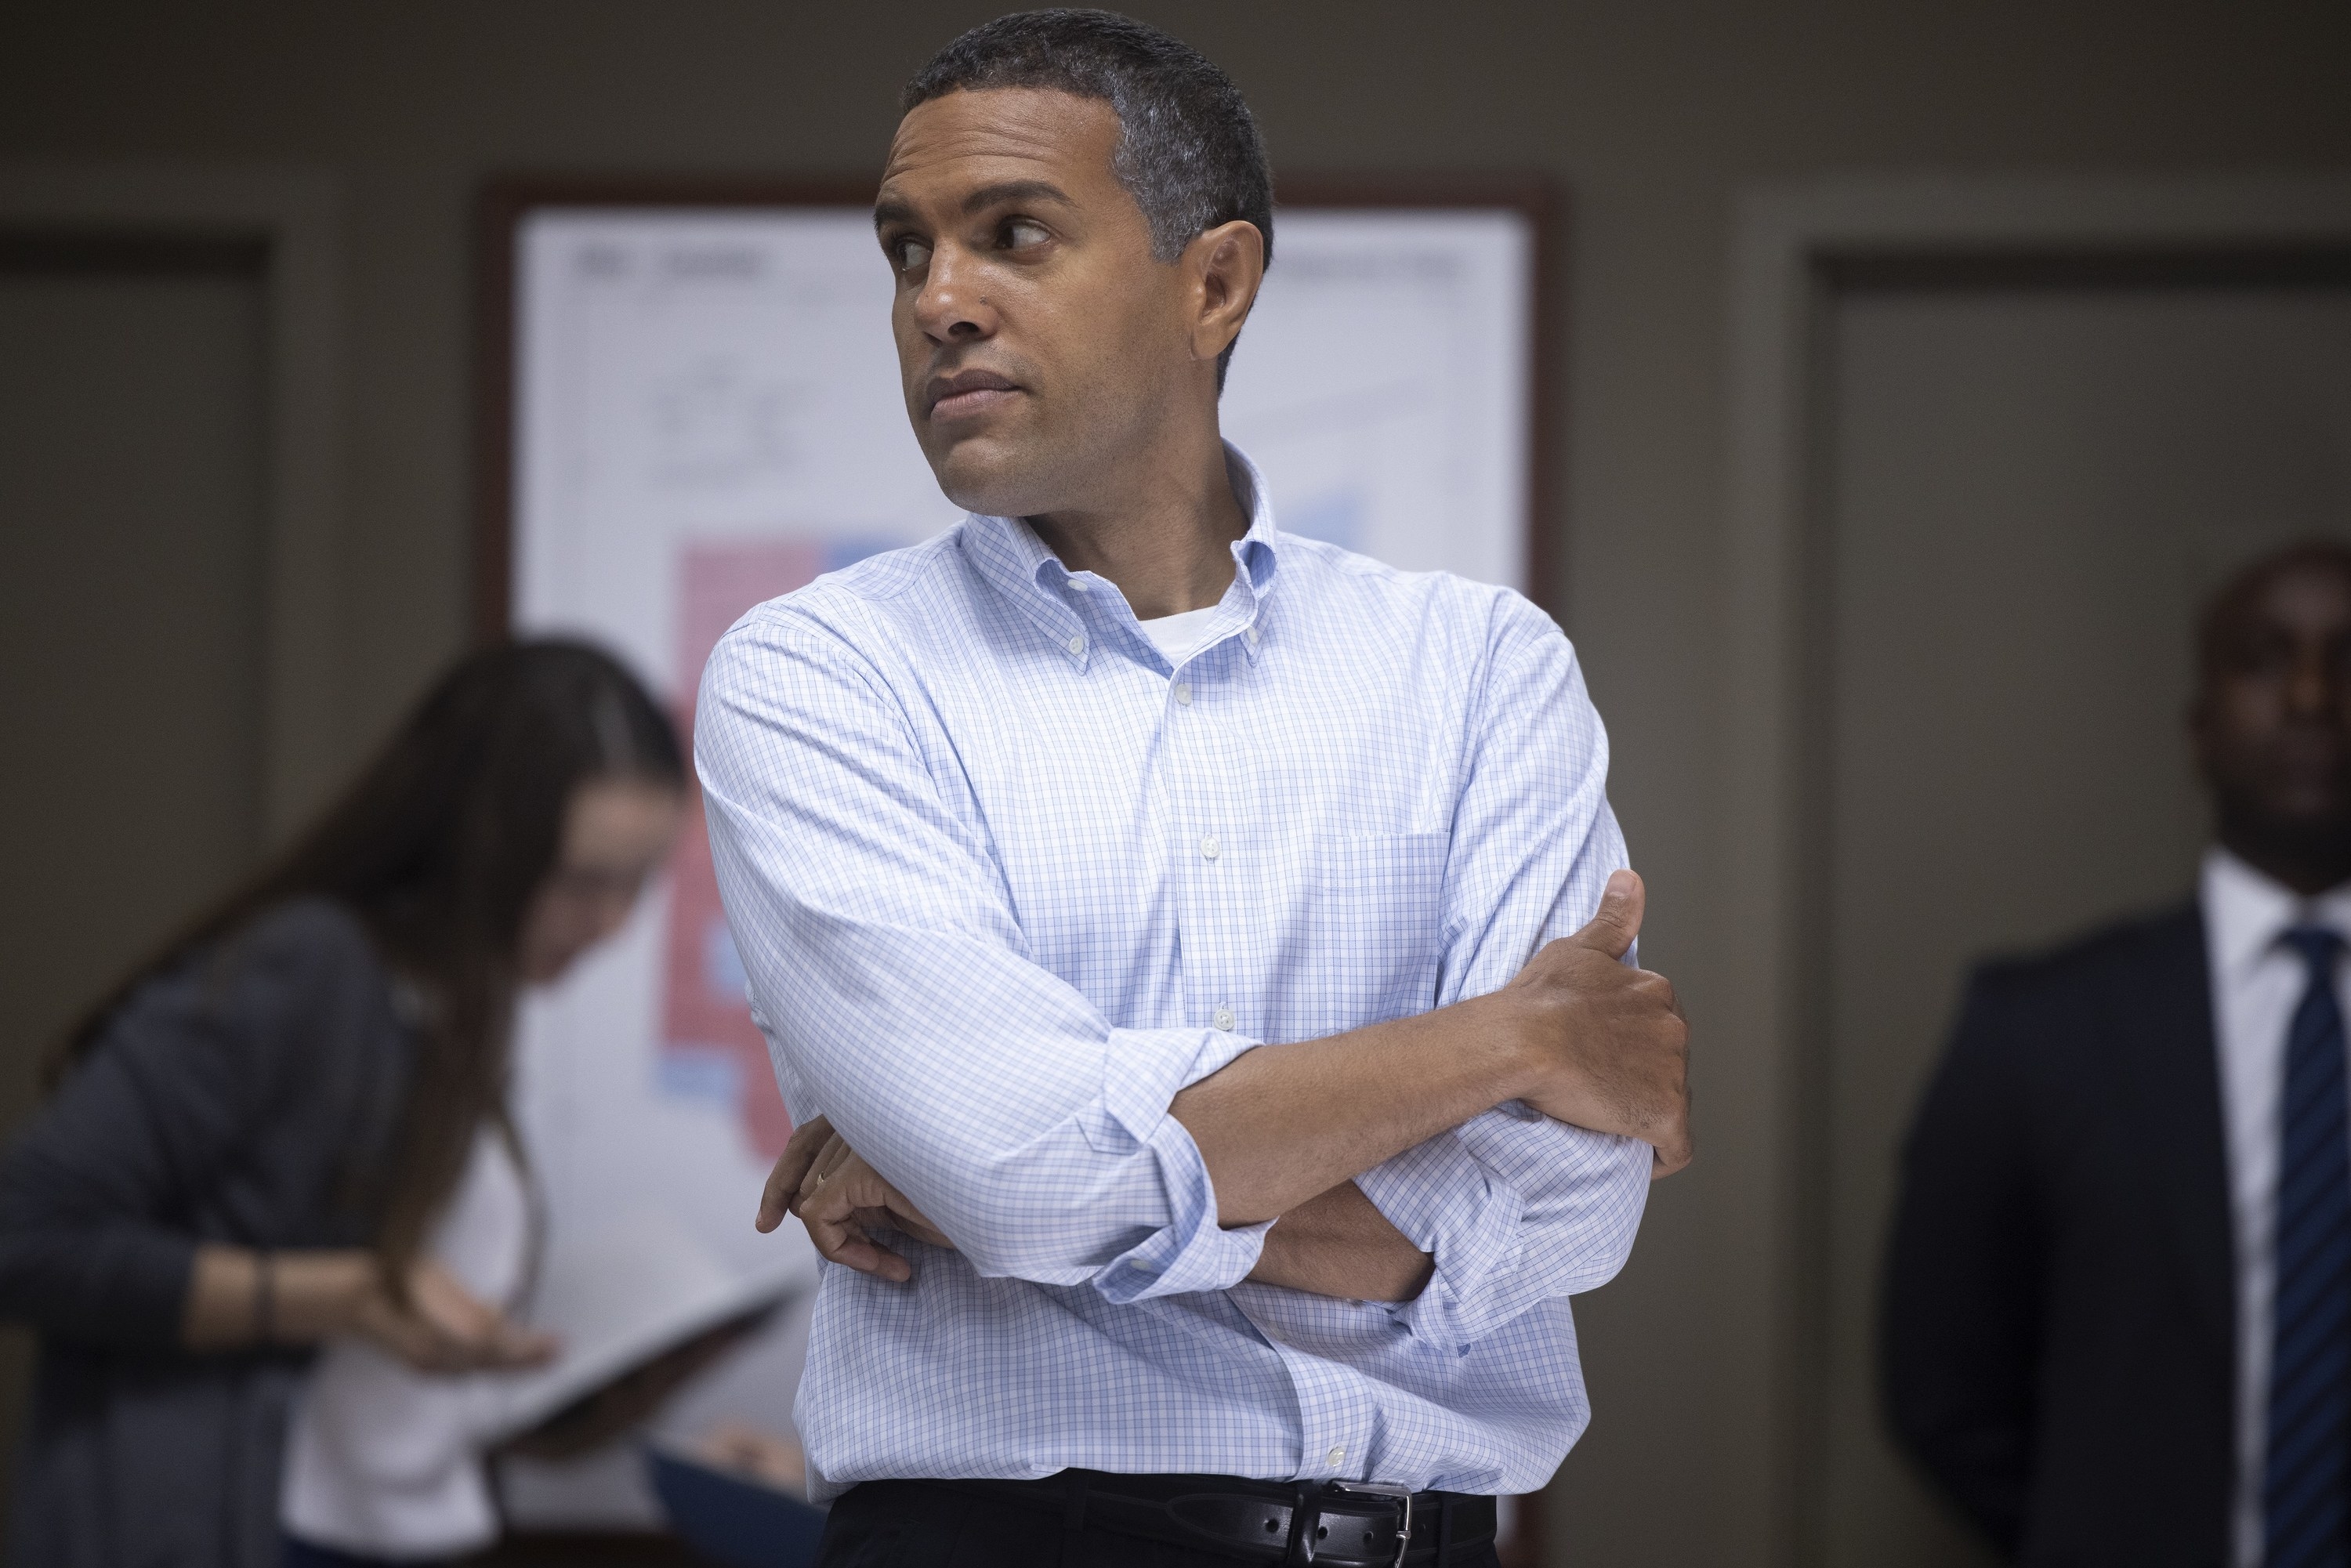 O-T Fagbenle as Barack Obama in THE FIRST LADY